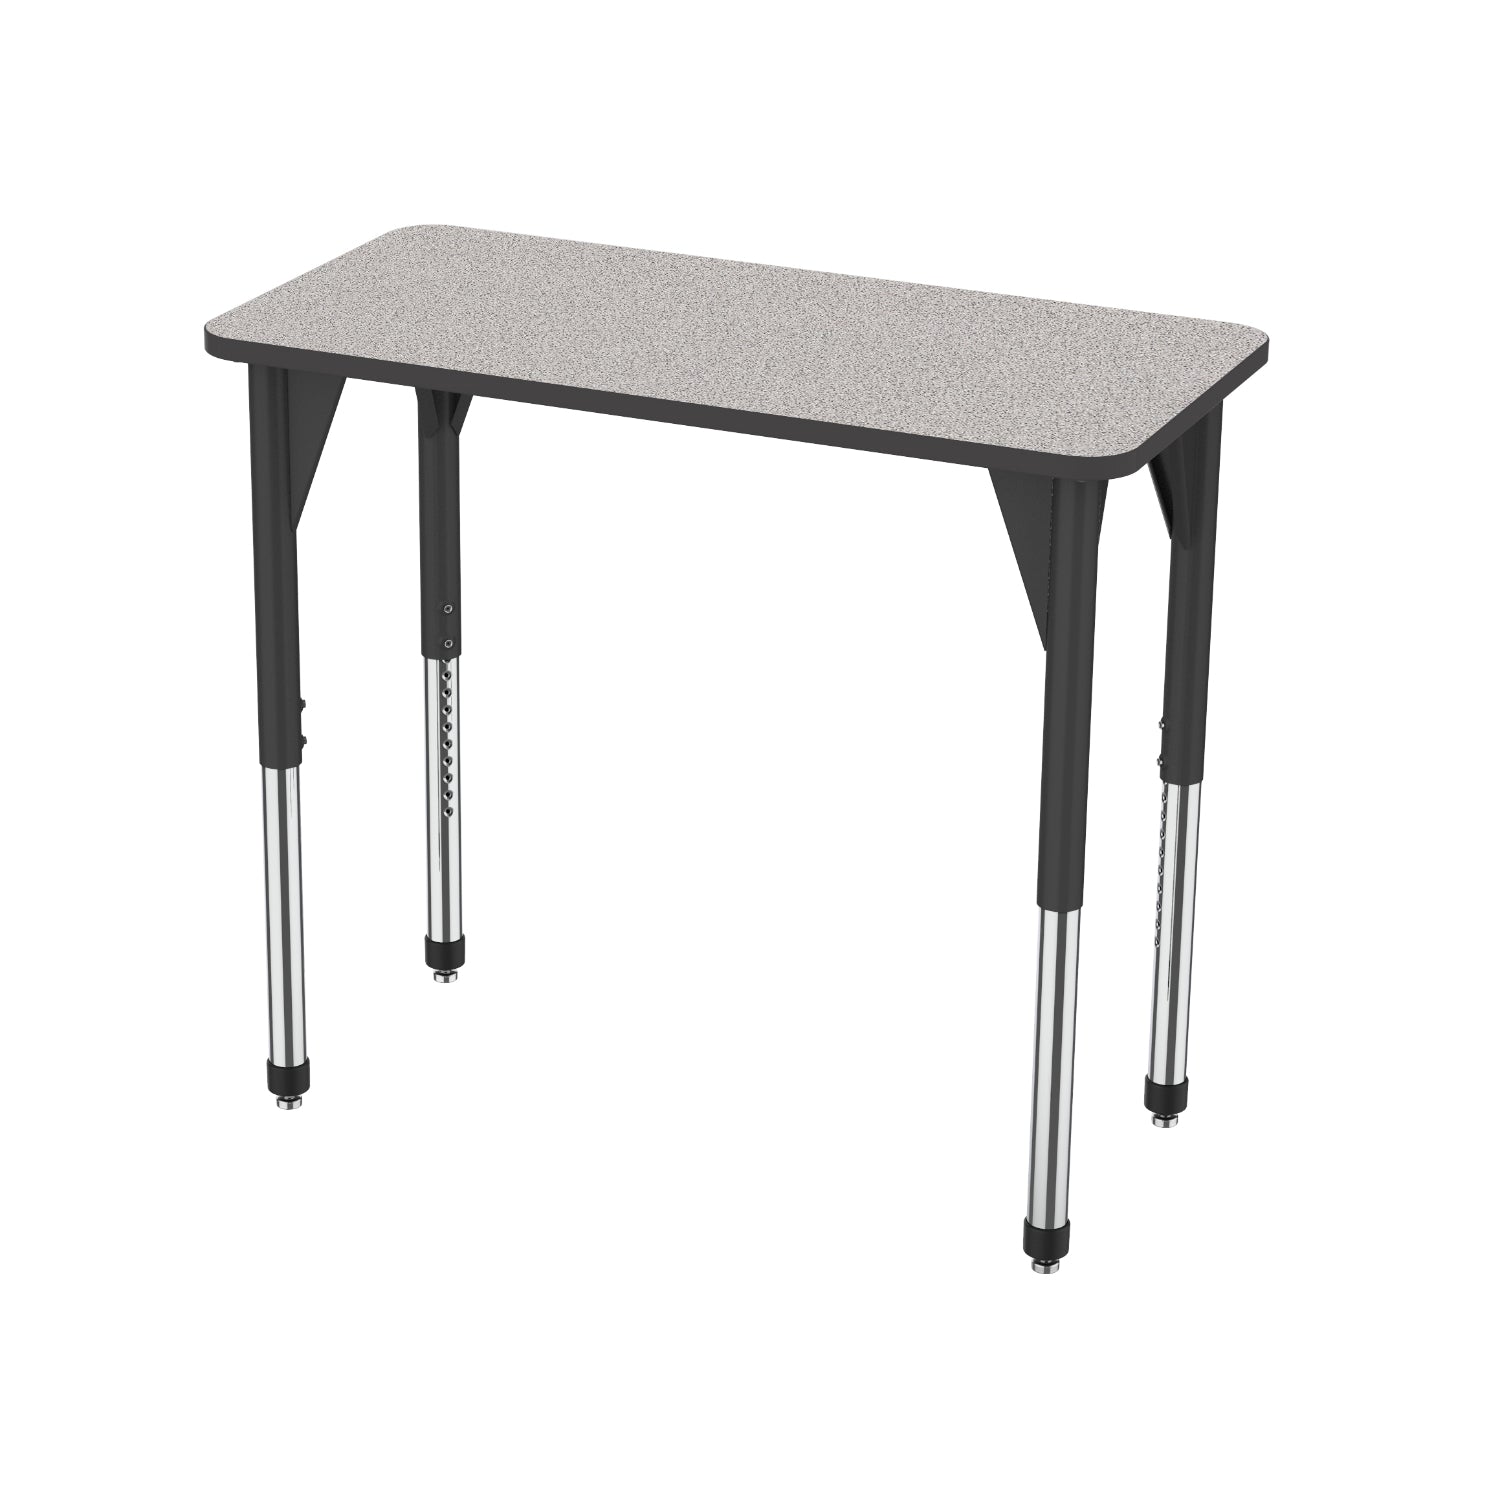 Premier Standing Height Collaborative Classroom Table, 24" x 48" Rectangle